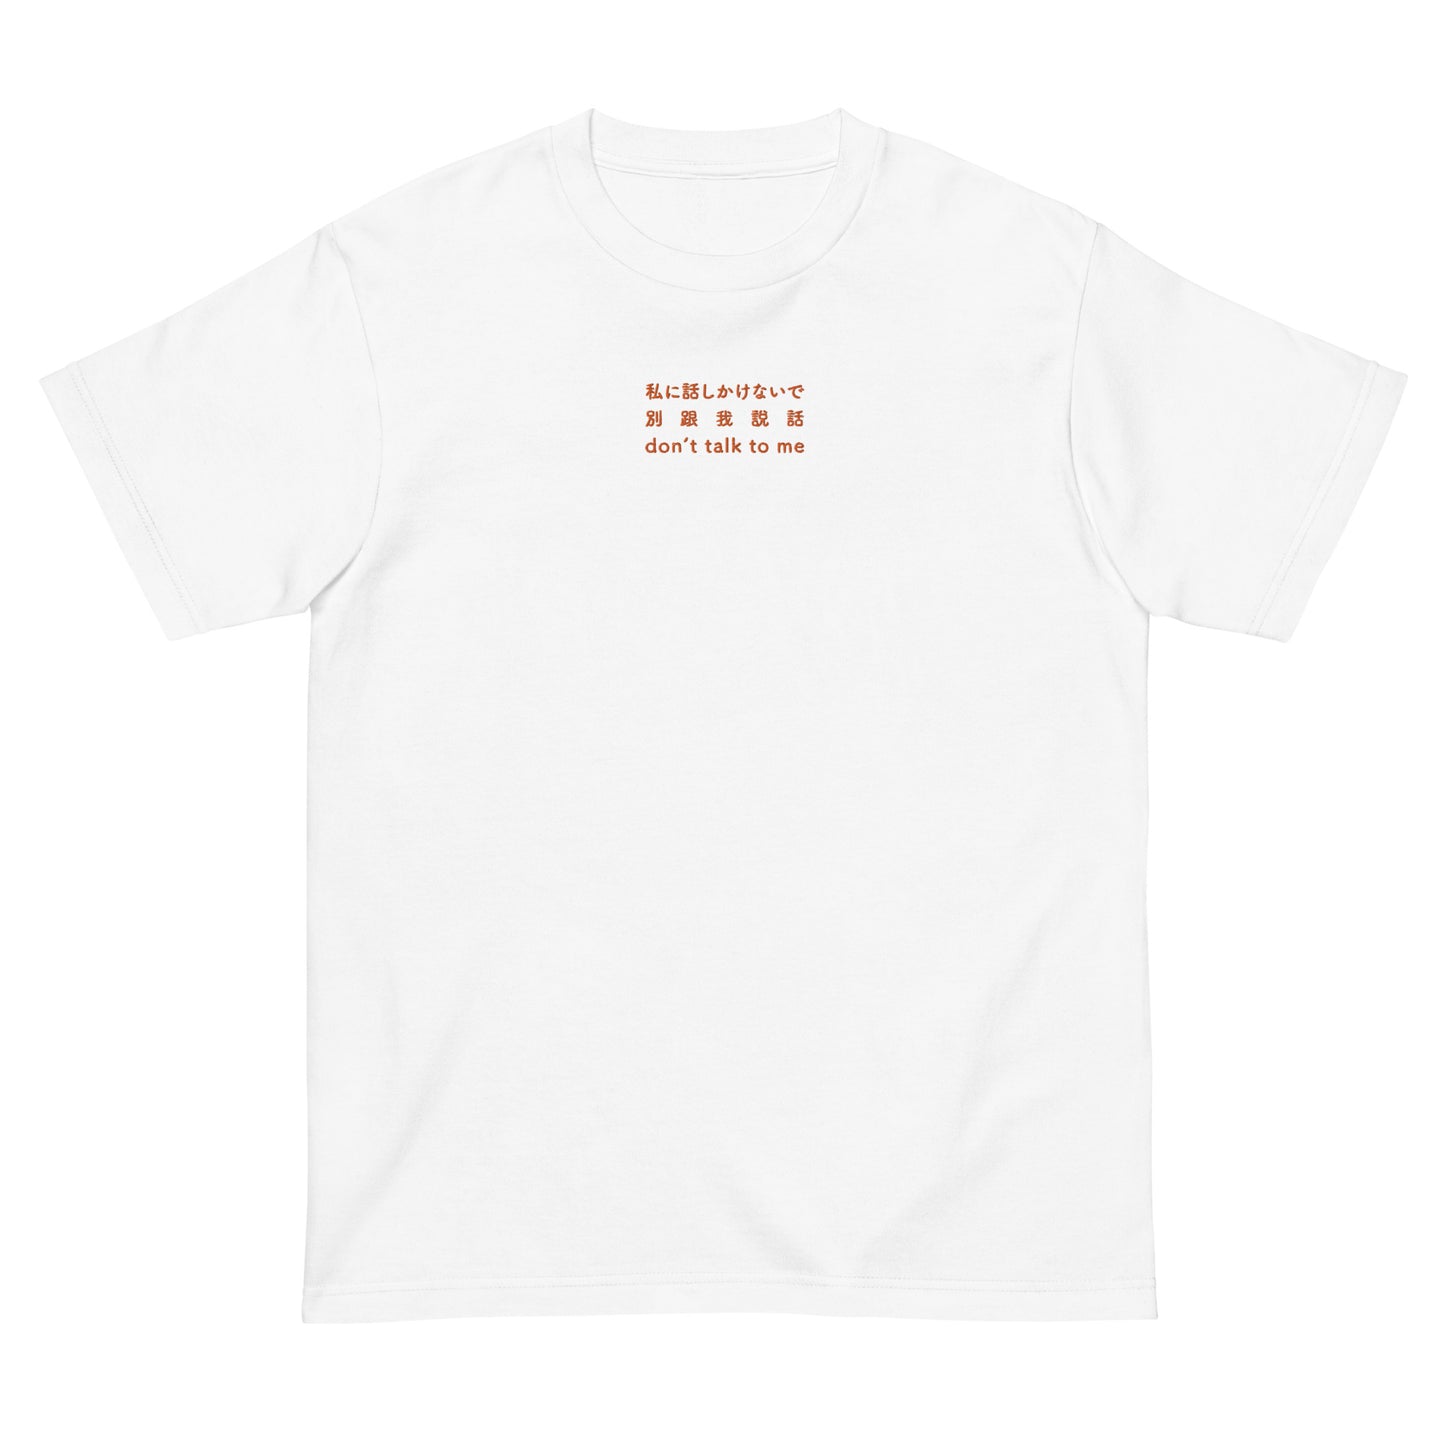 White High Quality Tee - Front Design with an Orange Embroidery "don't talk to me" in Japanese,Chinese and English